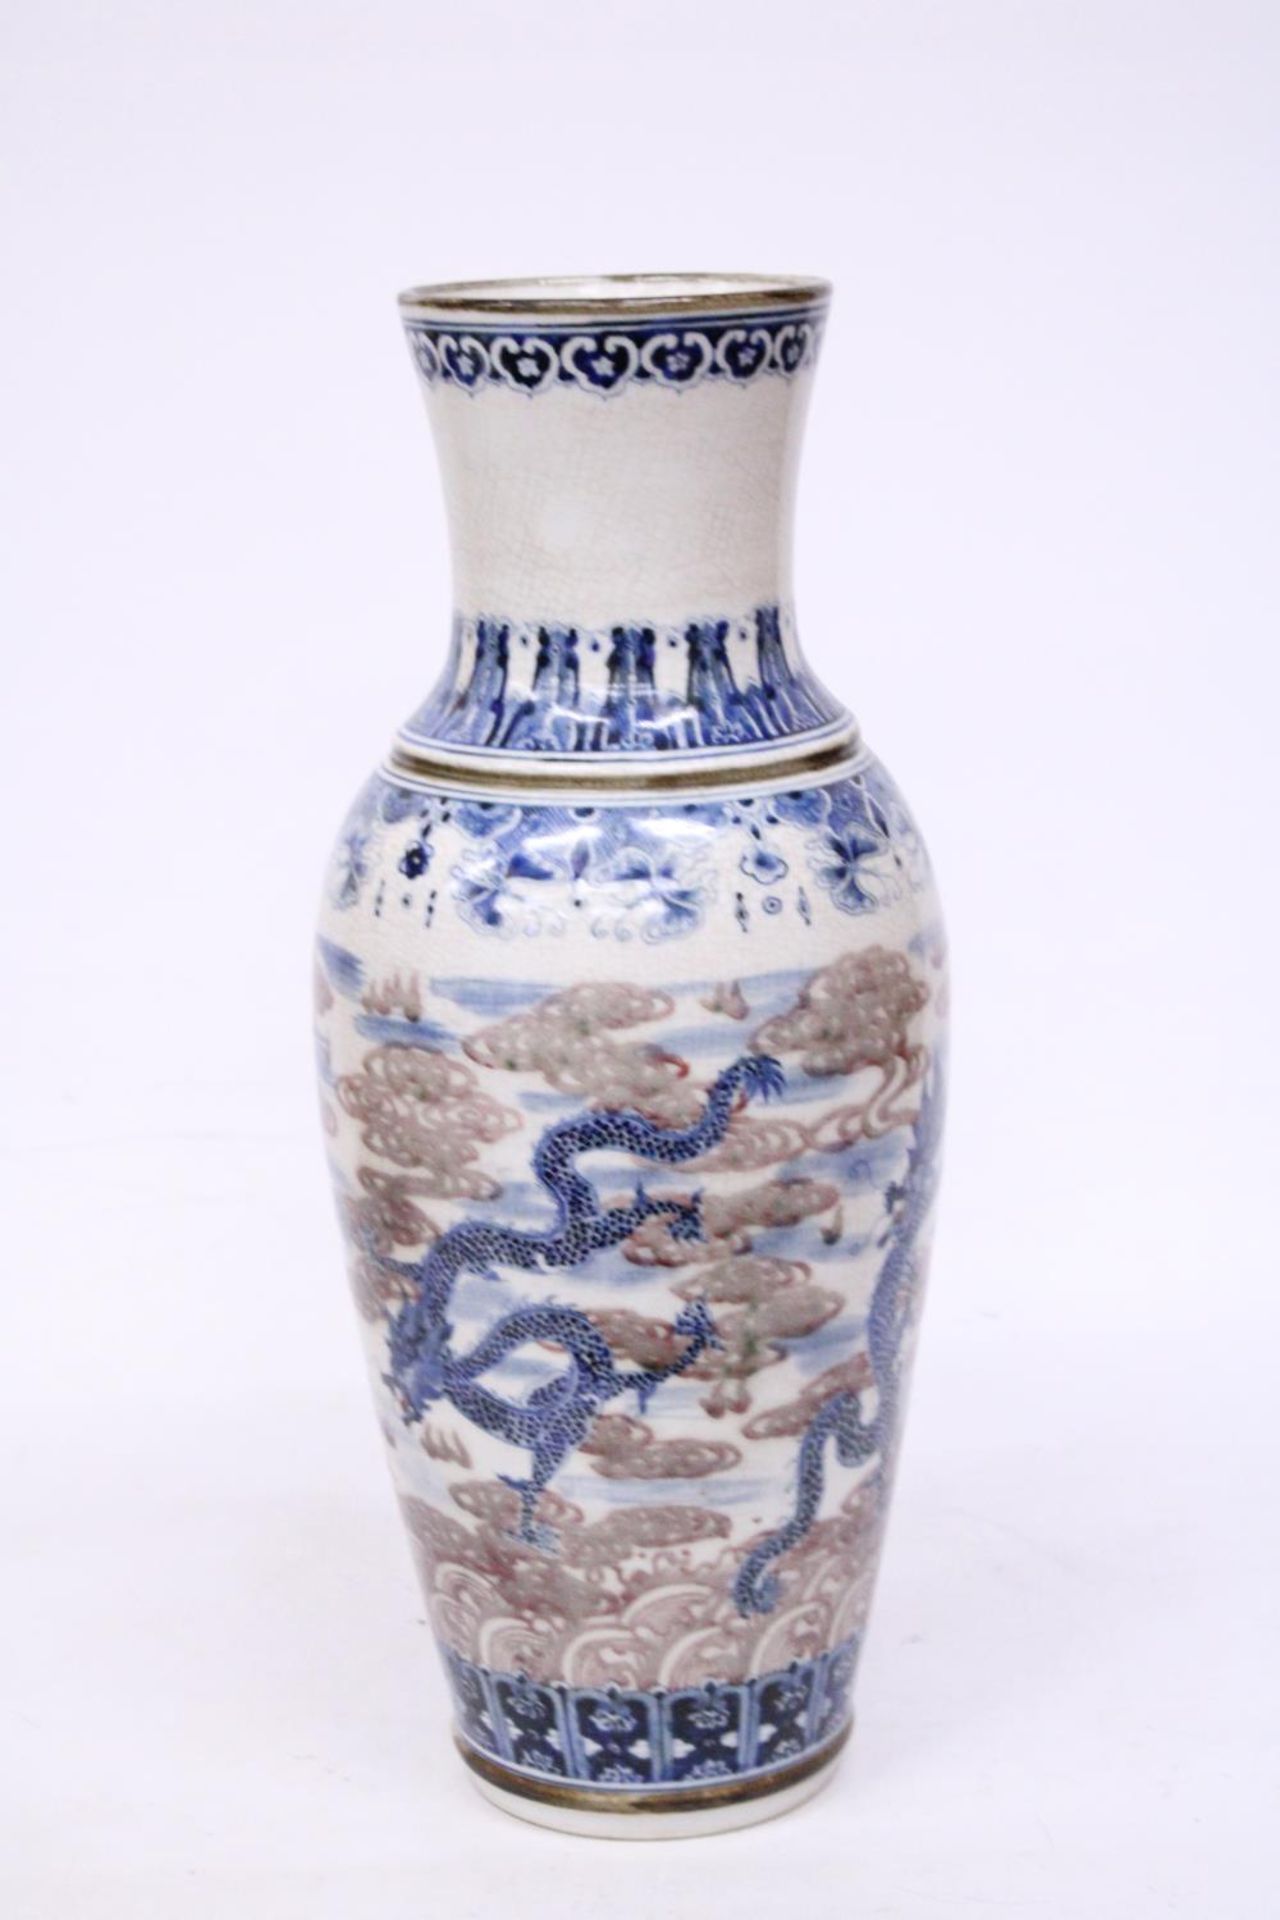 A LARGE PORCELAIN CHINESE GLAZED CRACKLEWARE VASE PORTRAYING DRAGONS WITH CHARACTER MARKS TO THE - Image 3 of 6